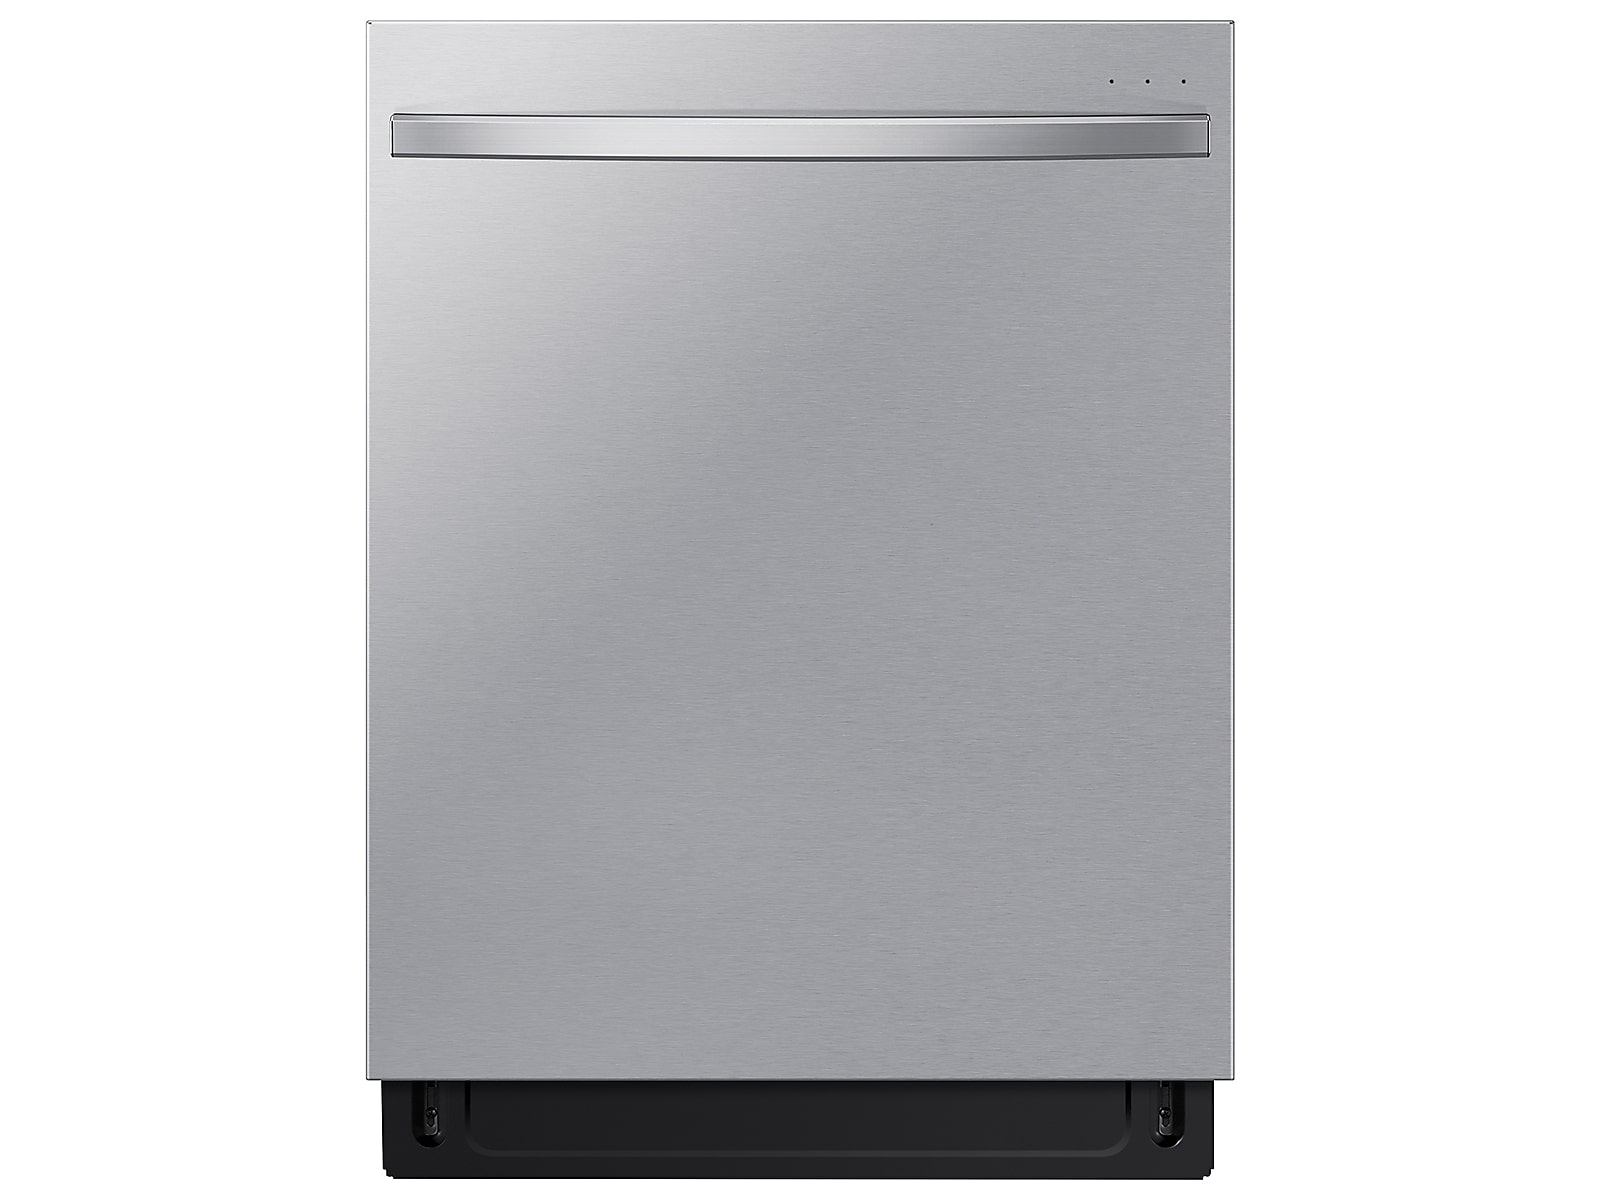 Samsung Smart 42dBA Dishwasher with StormWash+™ and Smart Dry in Silver(DW80B7071US/AA)